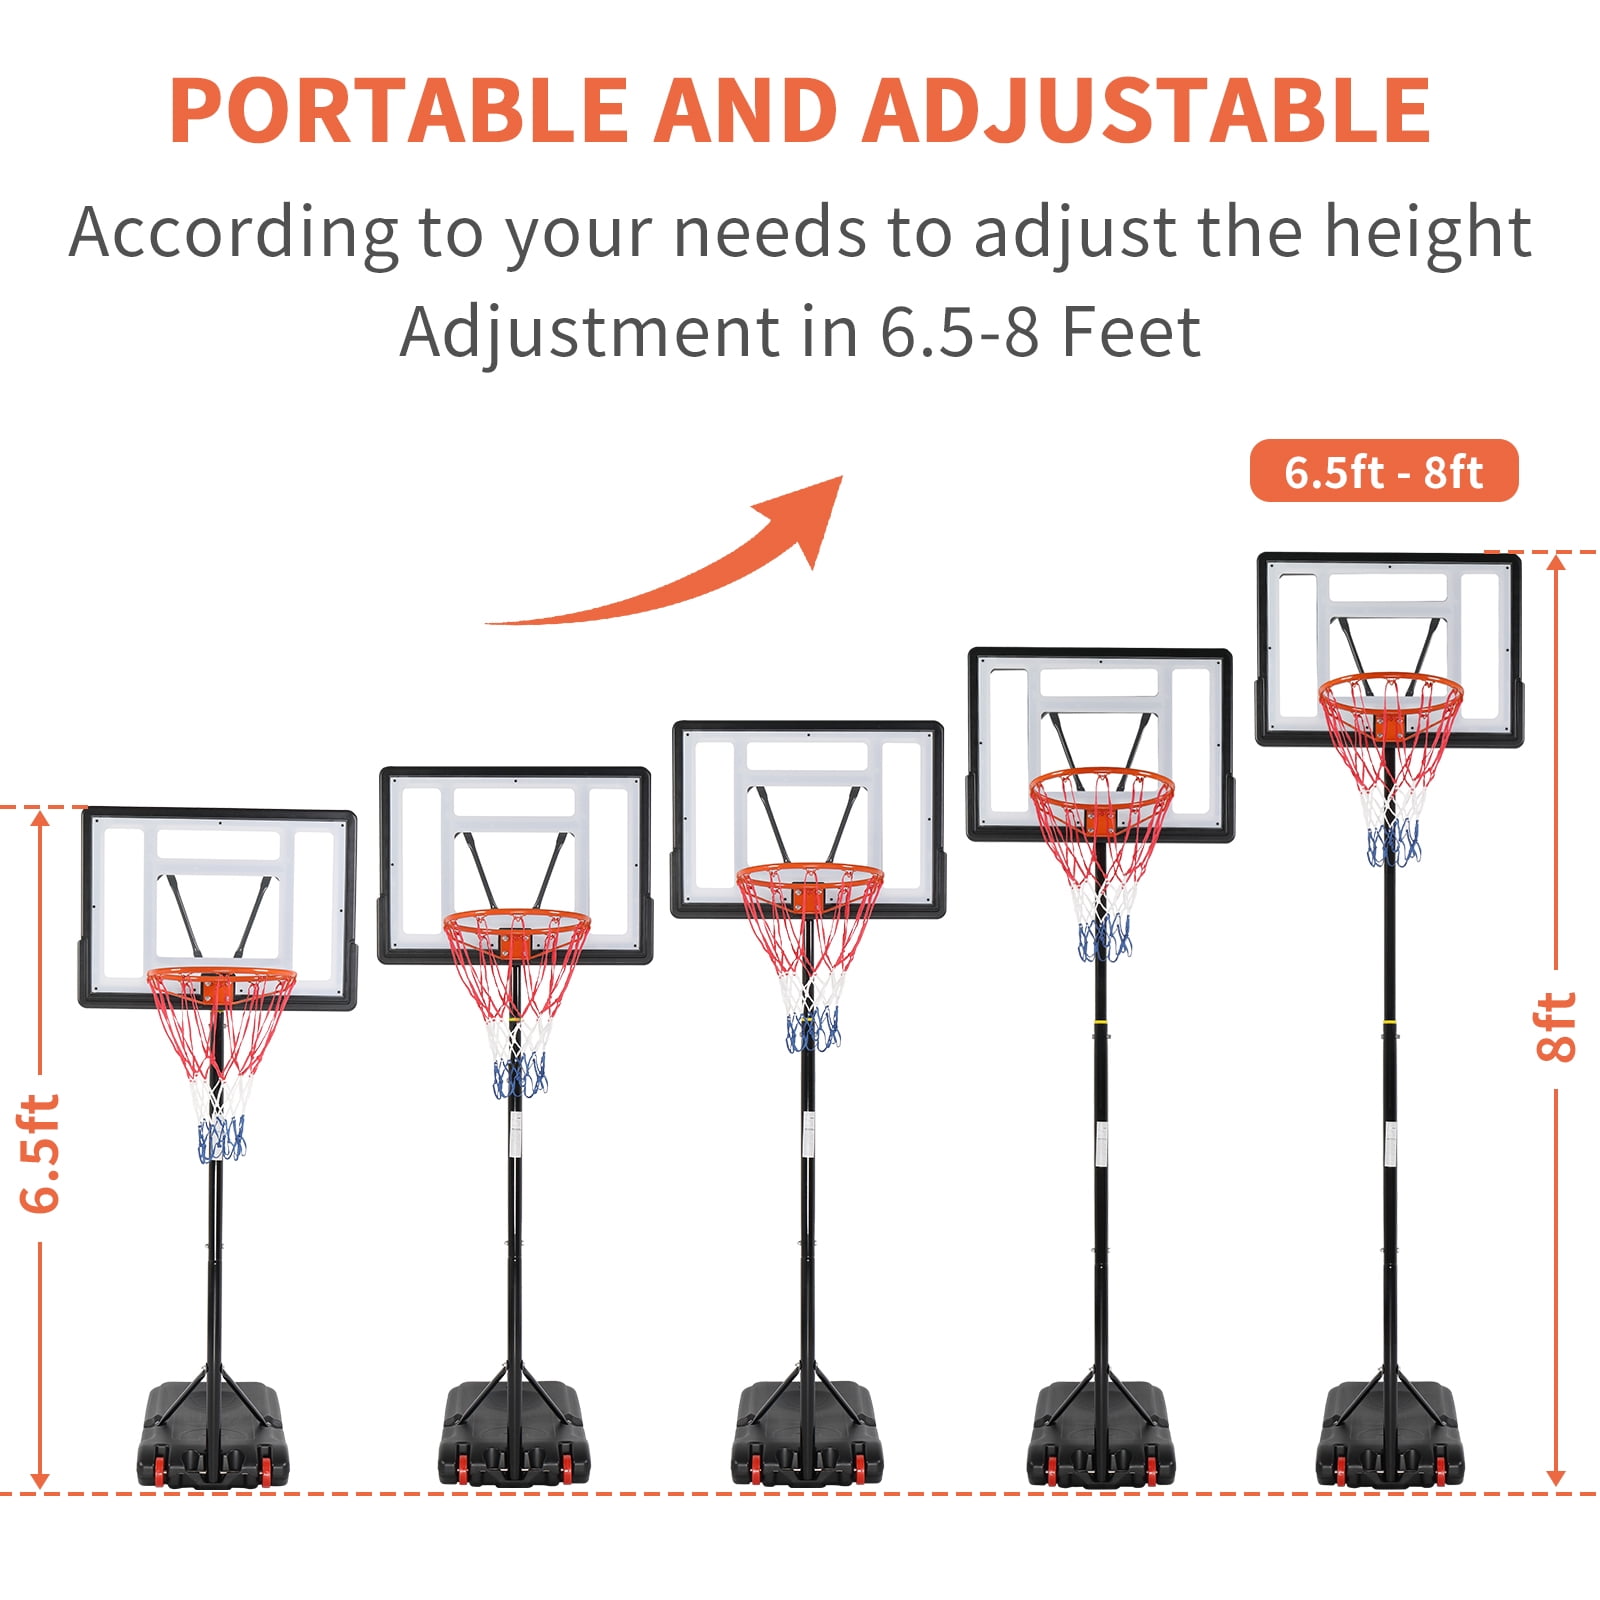 Ktaxon 33 In. Portable Basketball Hoop Stand, 6.5-8 ft Adjustable Basketball Goal System, with PVC Backboard Indoor/Outdoor